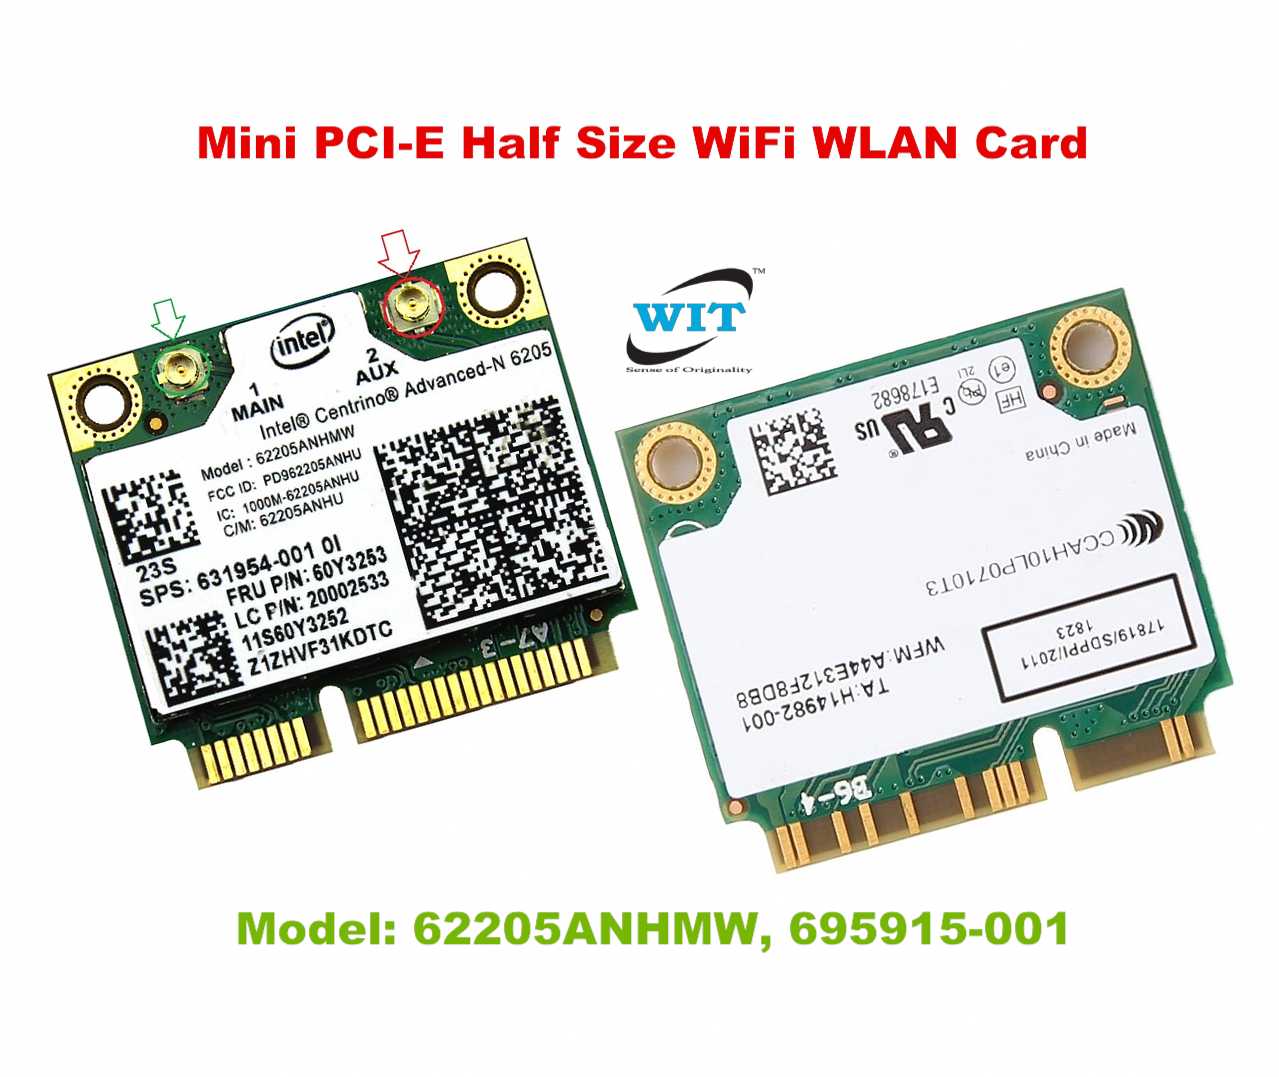 Modtager maskine Indien Spytte ud Intel Centrino Advanced-N 6205 Half-Mini PCI-E 300Mbps 802.11N 2.4G / 5Ghz  Dual brand Laptop Internal WLan or WIFI or Wireless LAN card with Bluetooth  4.0, Model: 62205ANHMW, 695915-001 for Lenovo ThinkPad T420